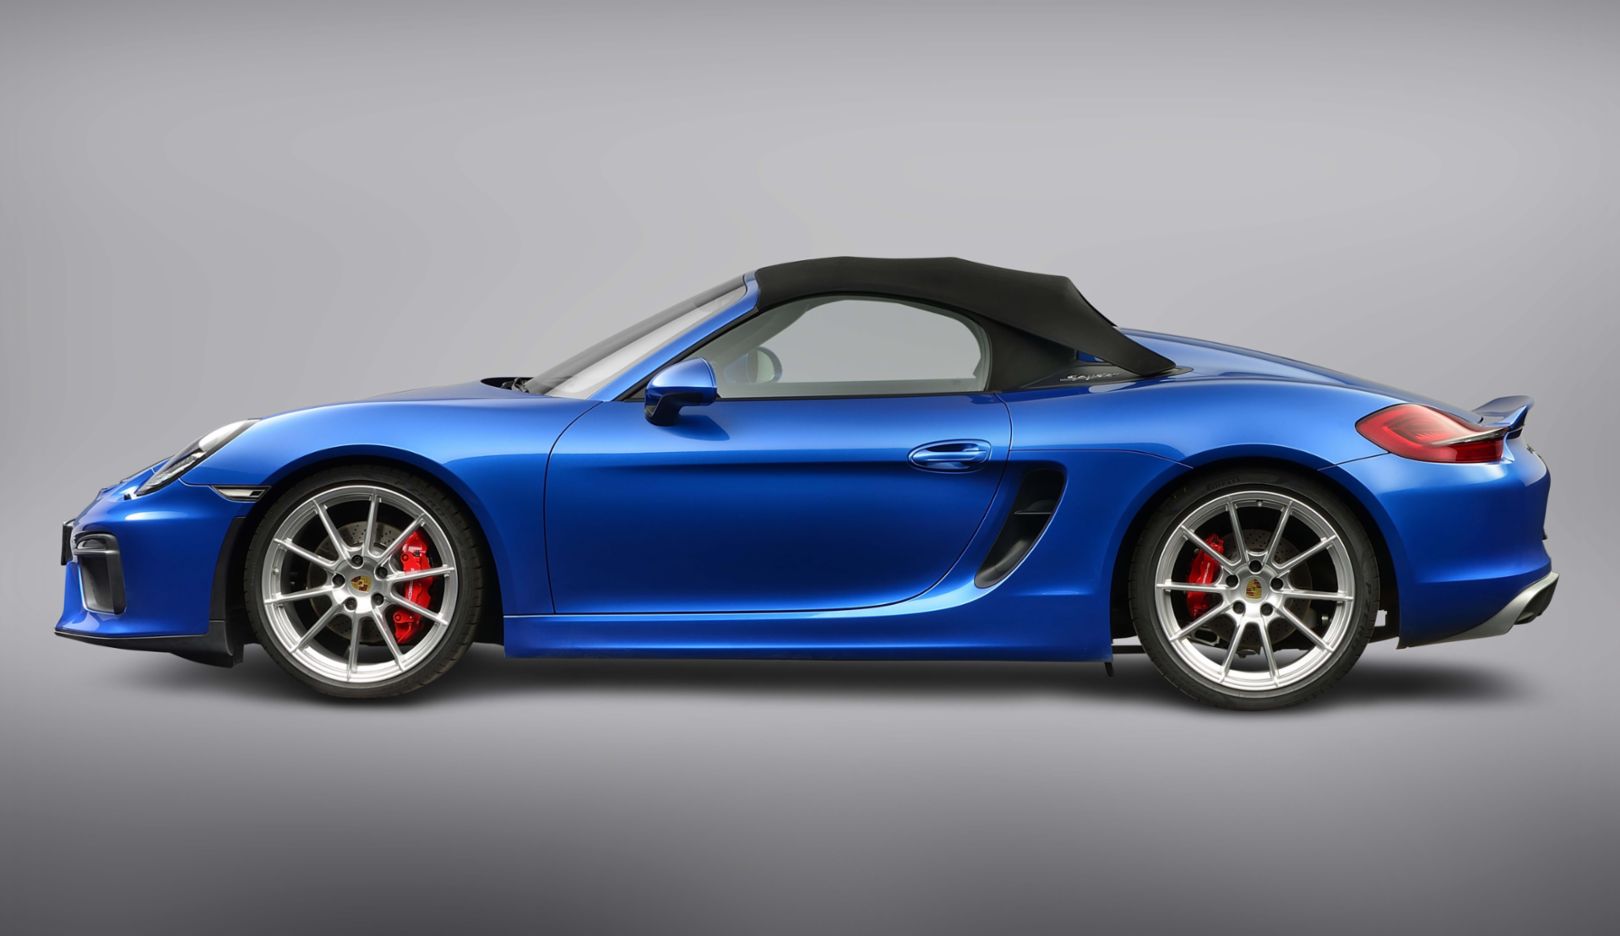 981 generation: Boxster Spyder special edition (2015). A classic driving experience and sporty performance: the 2015 Boxster Spyder special edition is available exclusively with a manual gearbox. The powerful Boxster sprints from zero to 100 km/h in 4.5 seconds. 